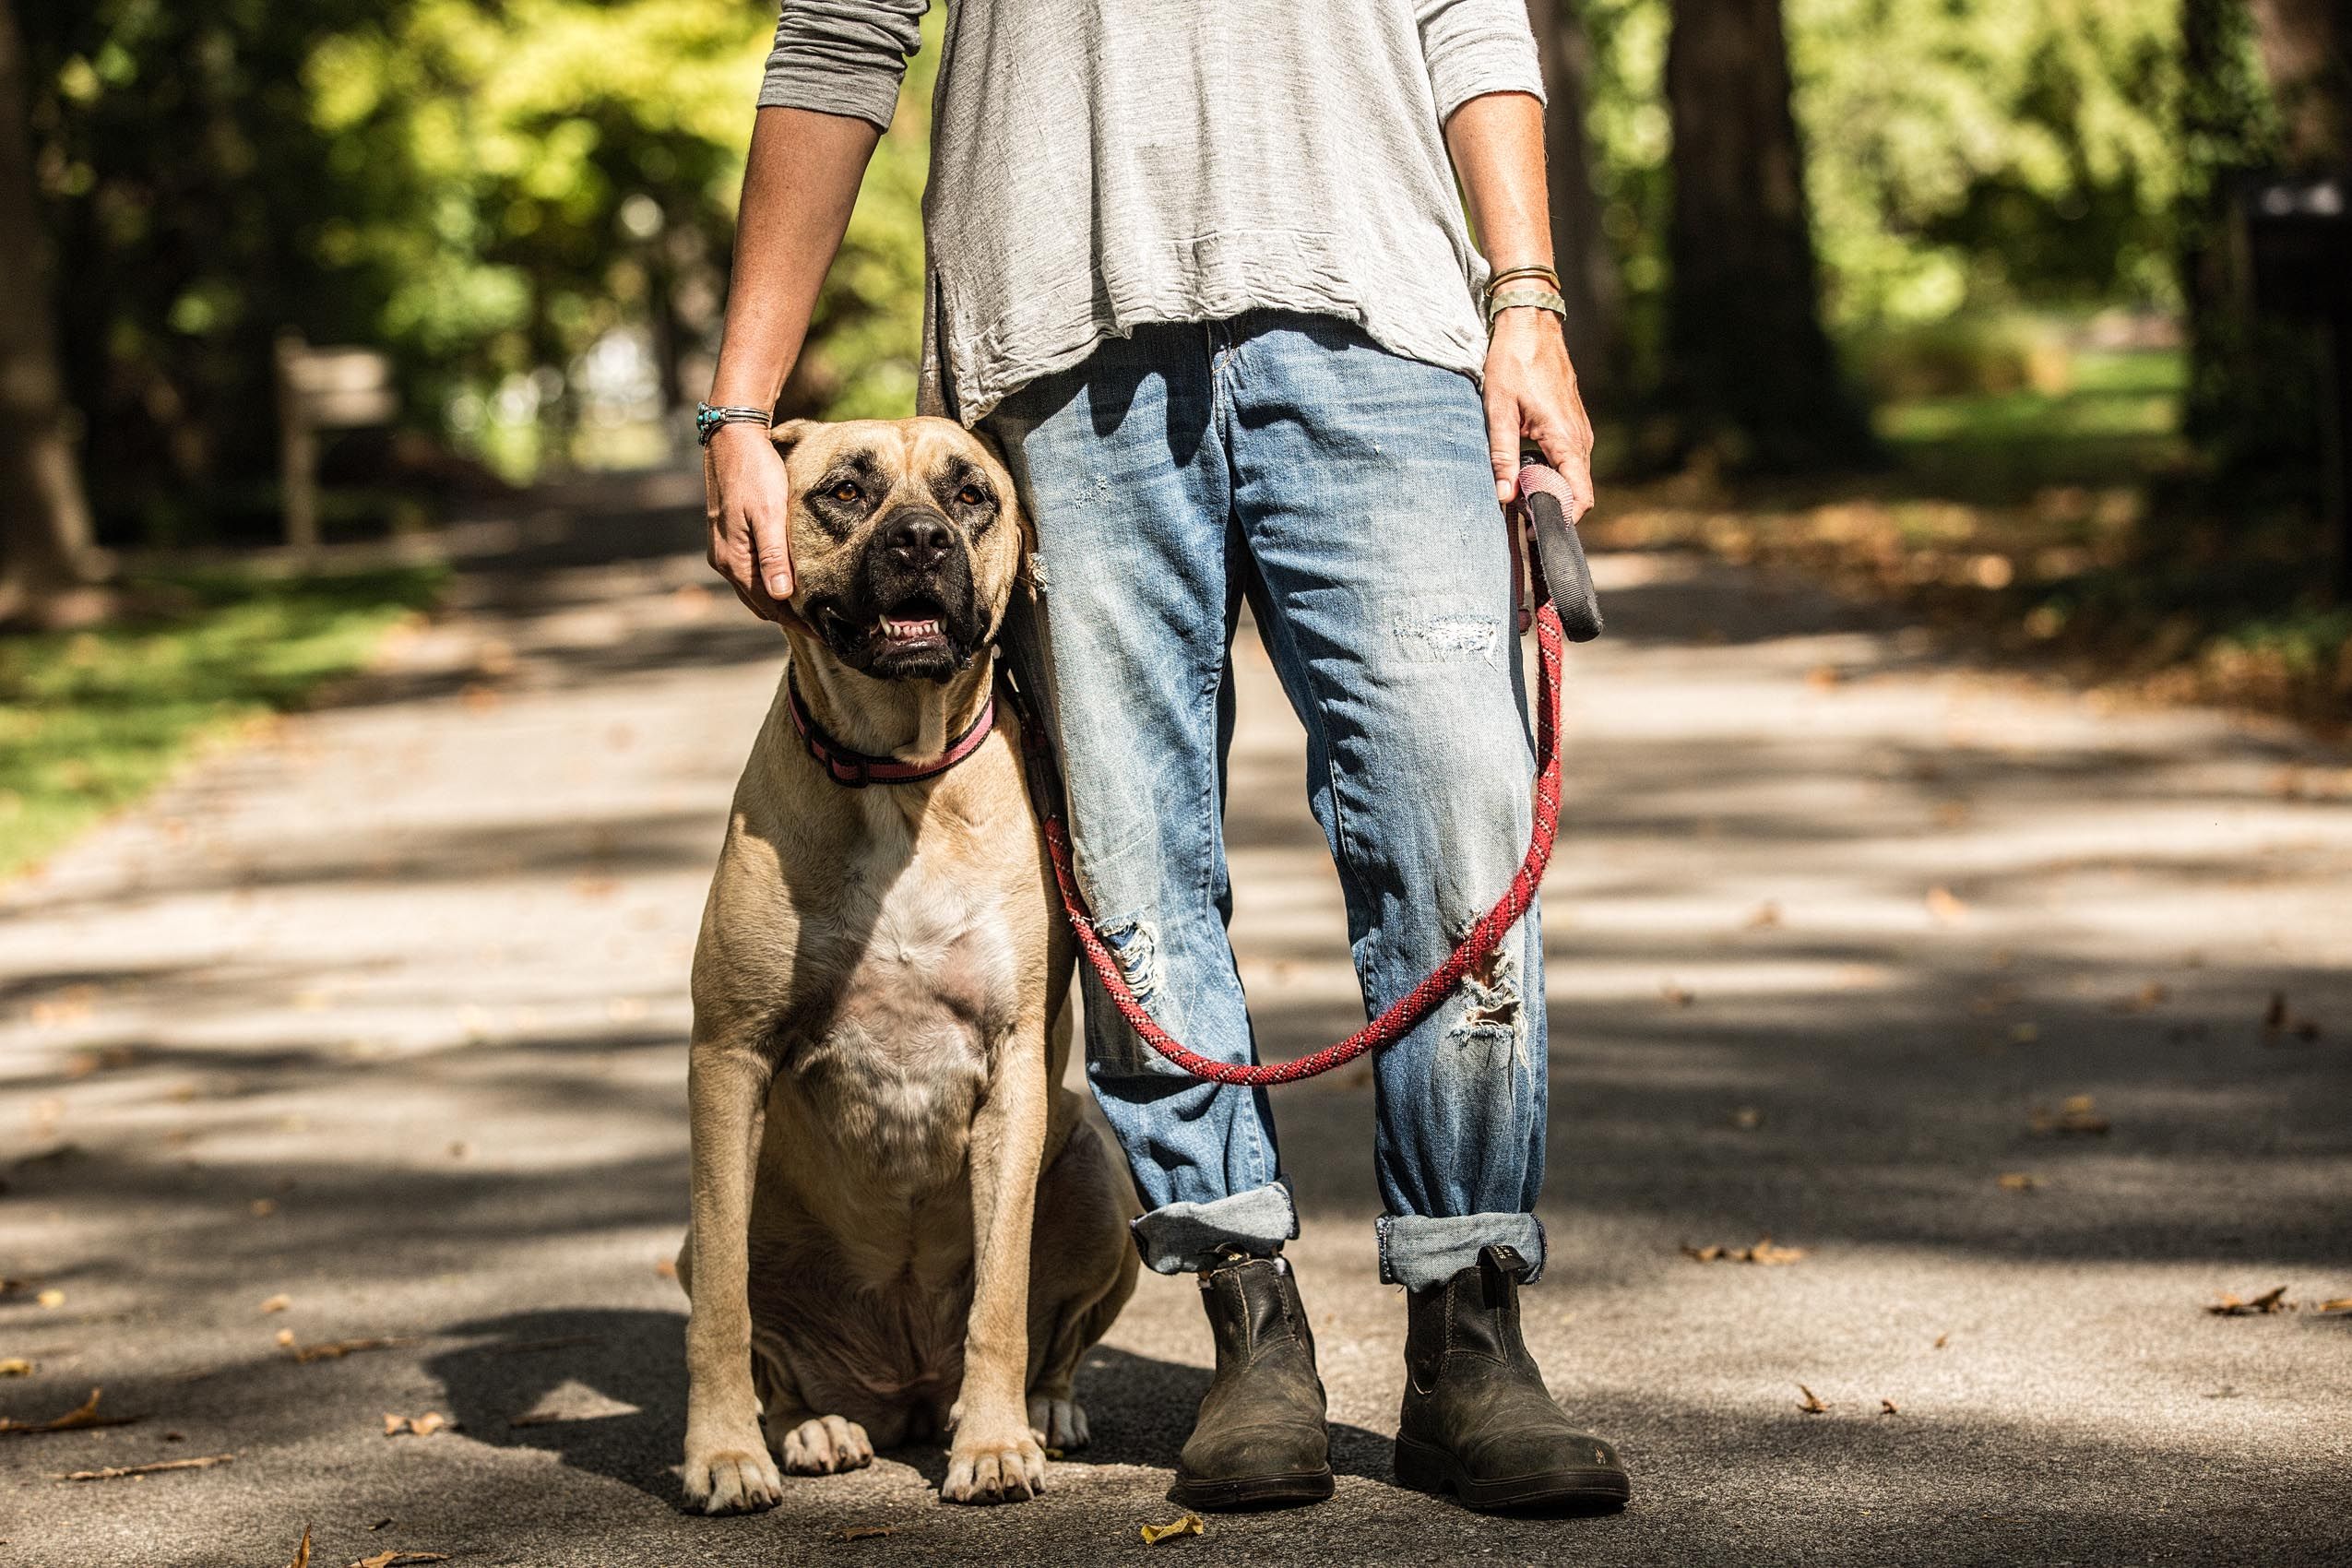 Dog and Owner Pose on a Walk